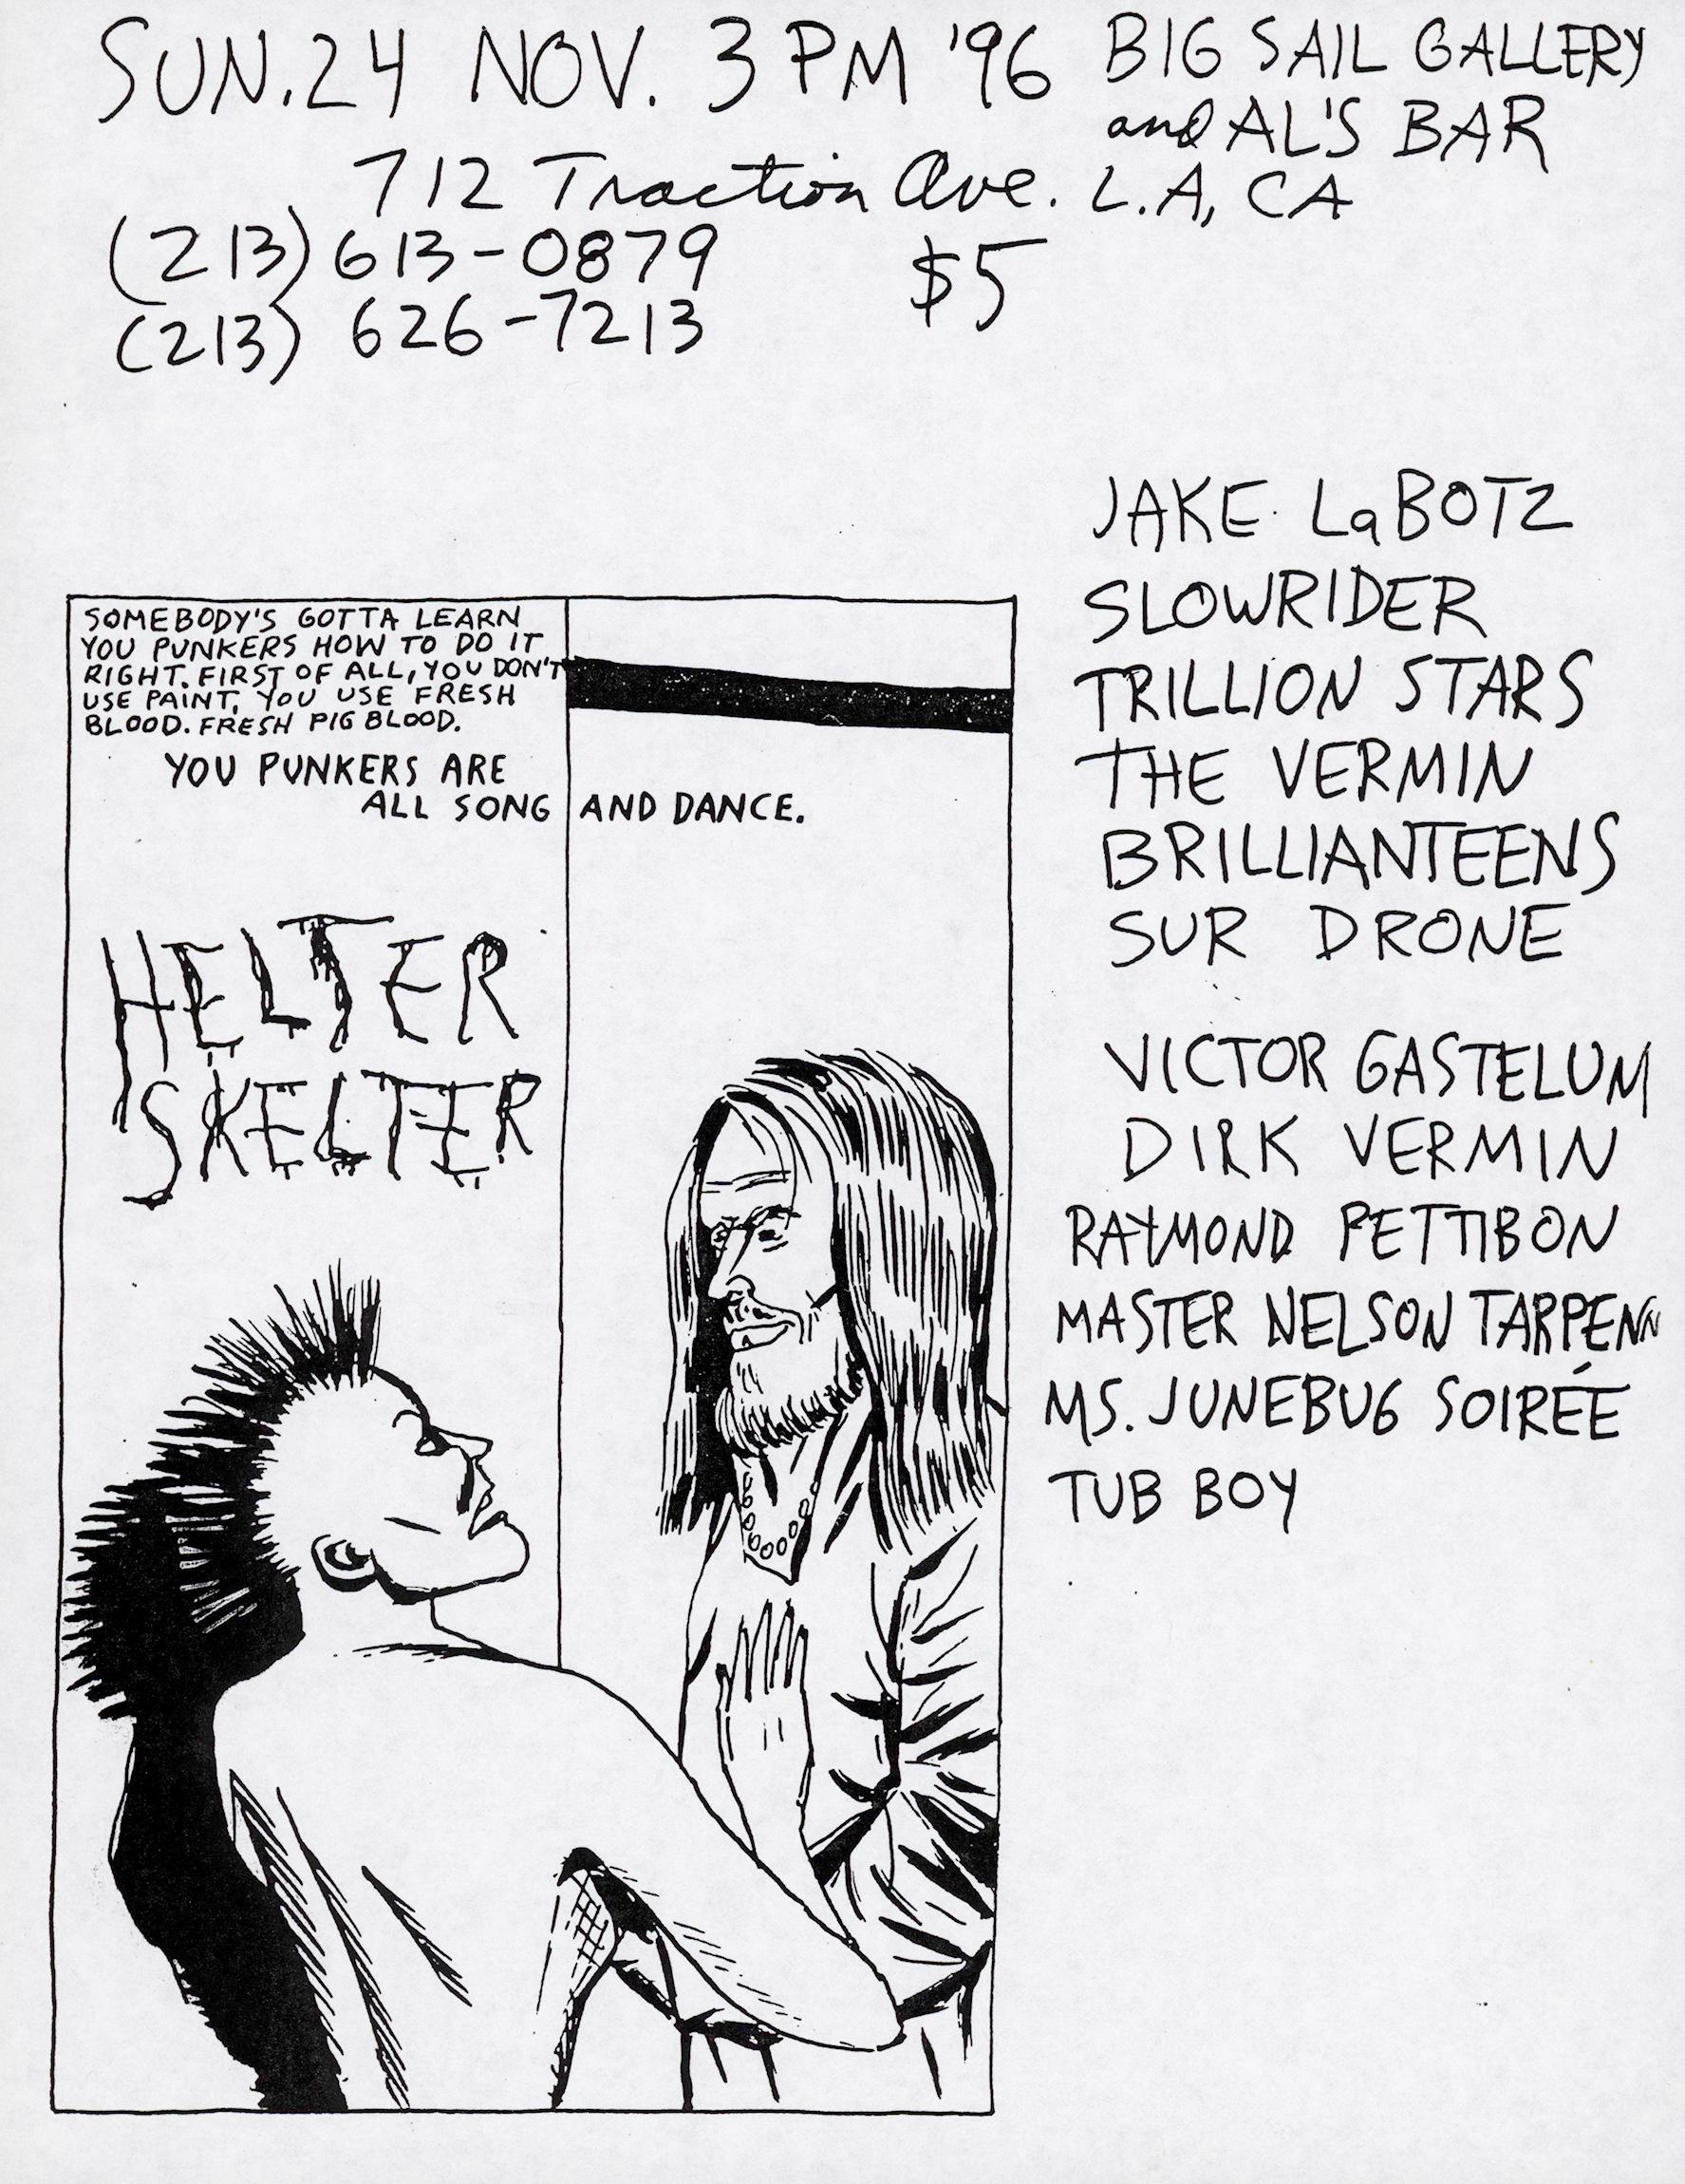 Raymond Pettibon illustrated Punk flyer 1996: 
Super rare 1996 punk flyer illustrated by Raymond Pettibon for a Los Angeles, CA venue where Pettibon performed among friends (Pettibon presented as a performer on mid lower right). Imagery references